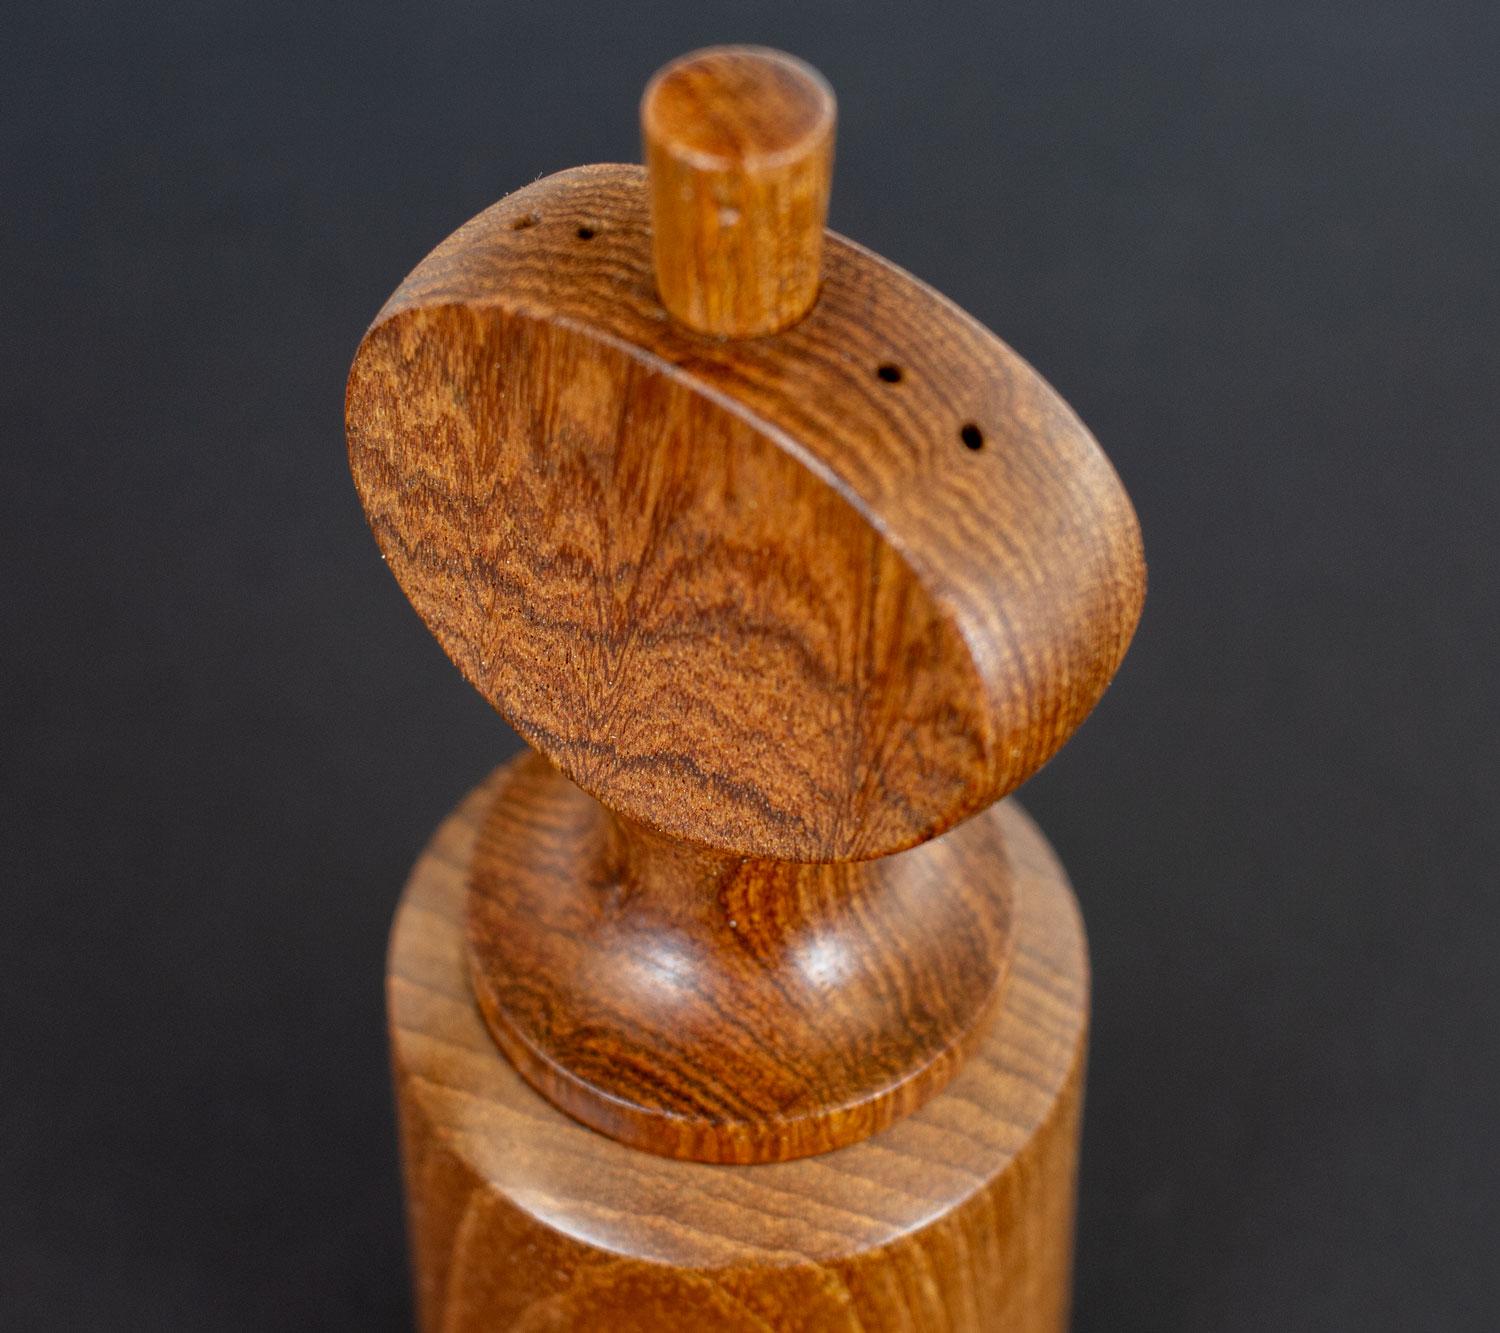 Teak pepper mill and salt pot designed by Jens Quistgaard, a Danish sculptor and industrial designer, in the late 1950s for Dansk Designs. This is model 833 which has a straight sided pepper grinder at the bottom with an oval salt dispenser at the